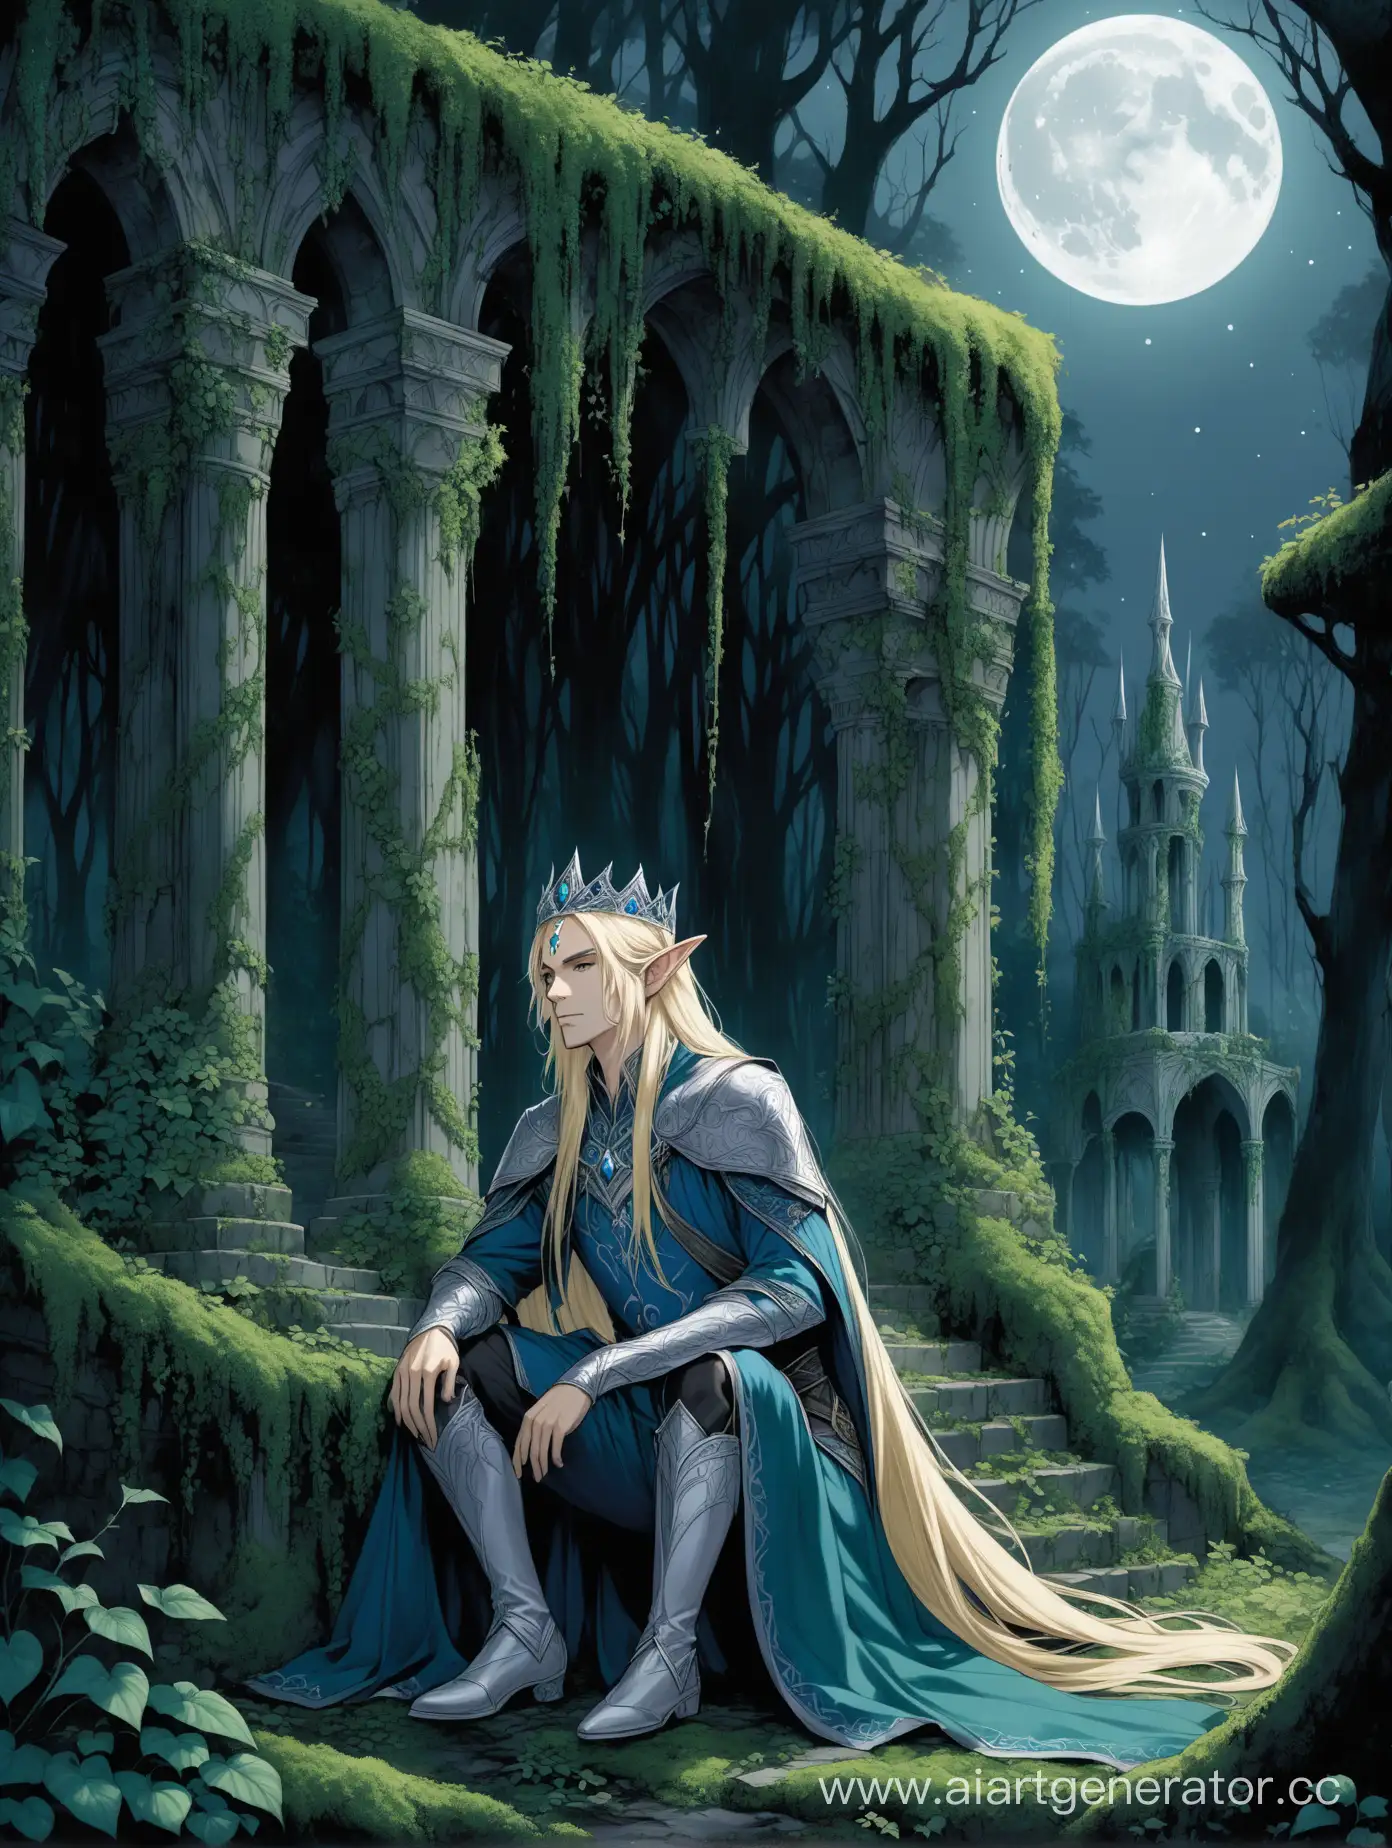 Moonlit-Elf-Prince-in-an-Enchanted-Forest-Ruins